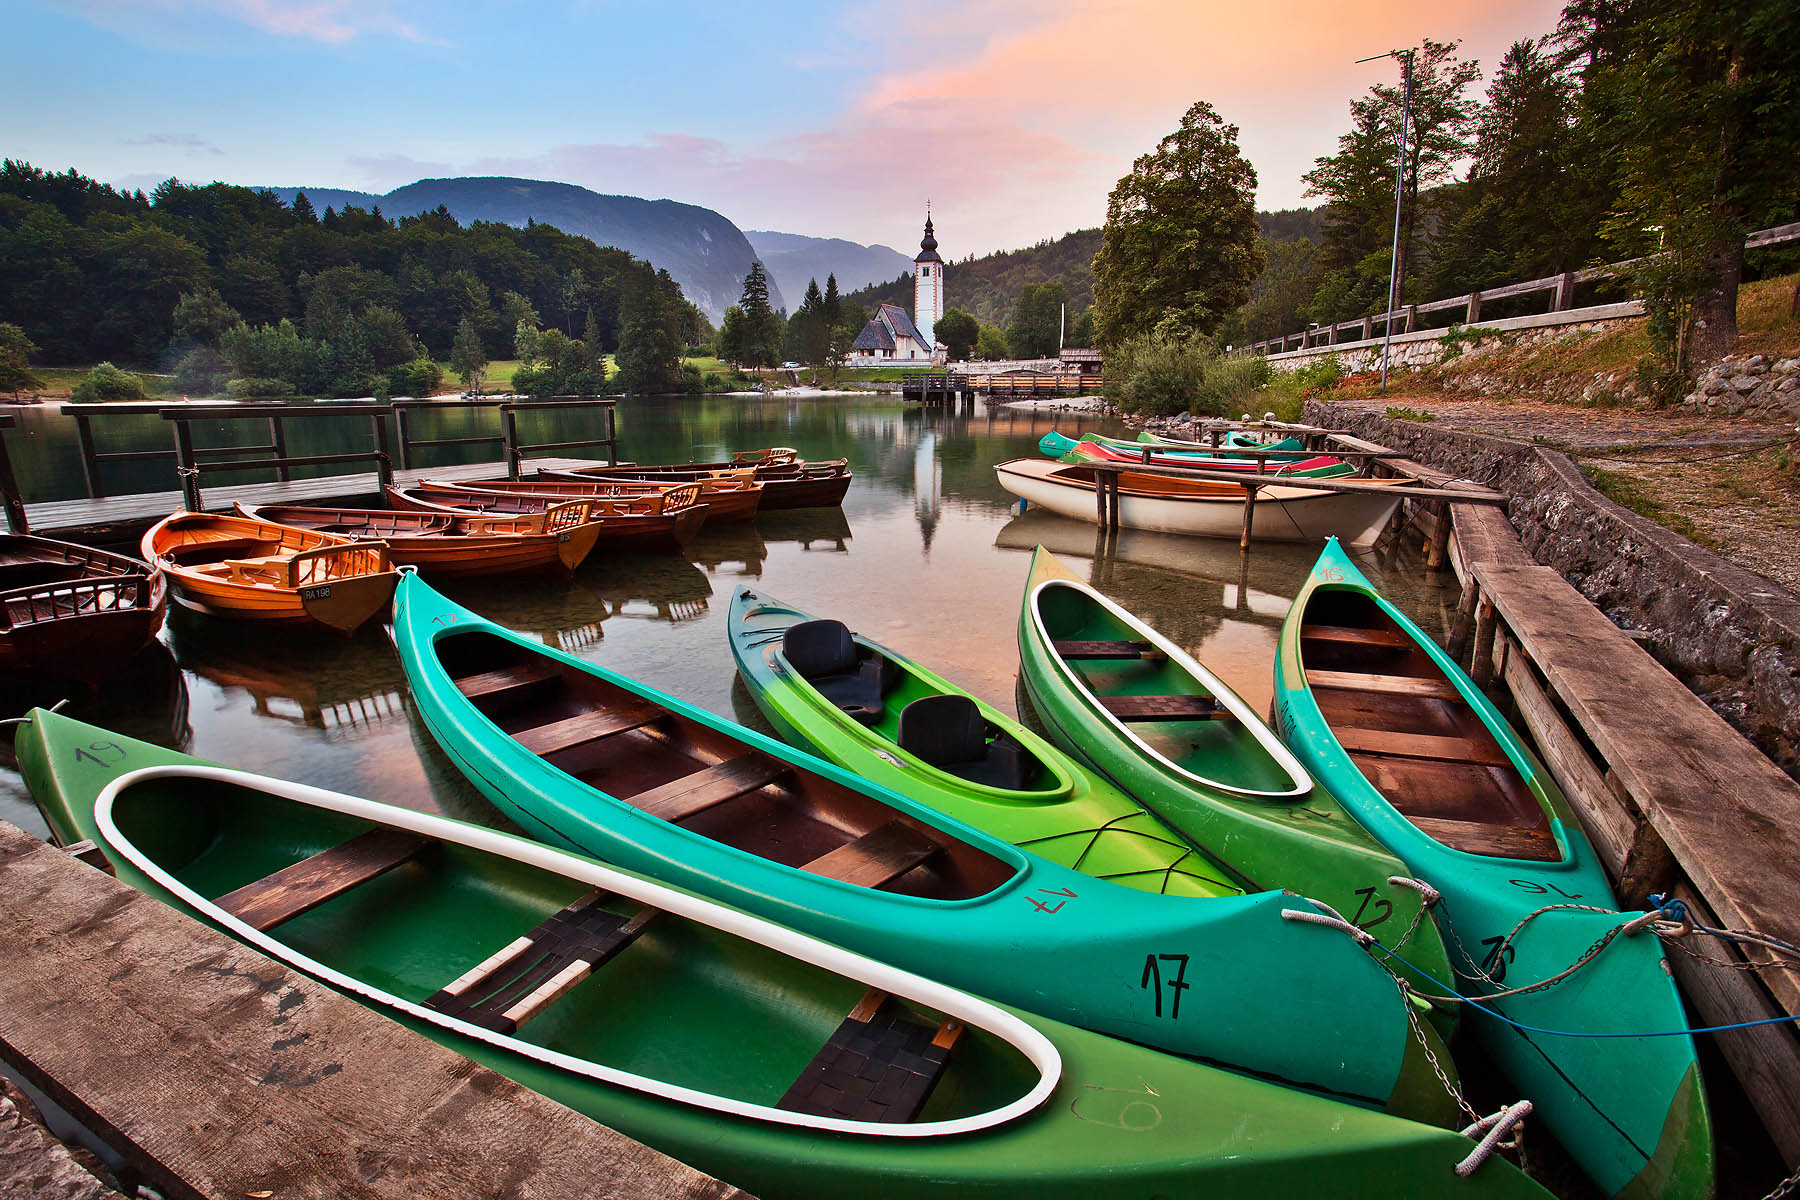 A group of anchored canoes at Lake Bohinj with the Church of St. John the Baptist in the background